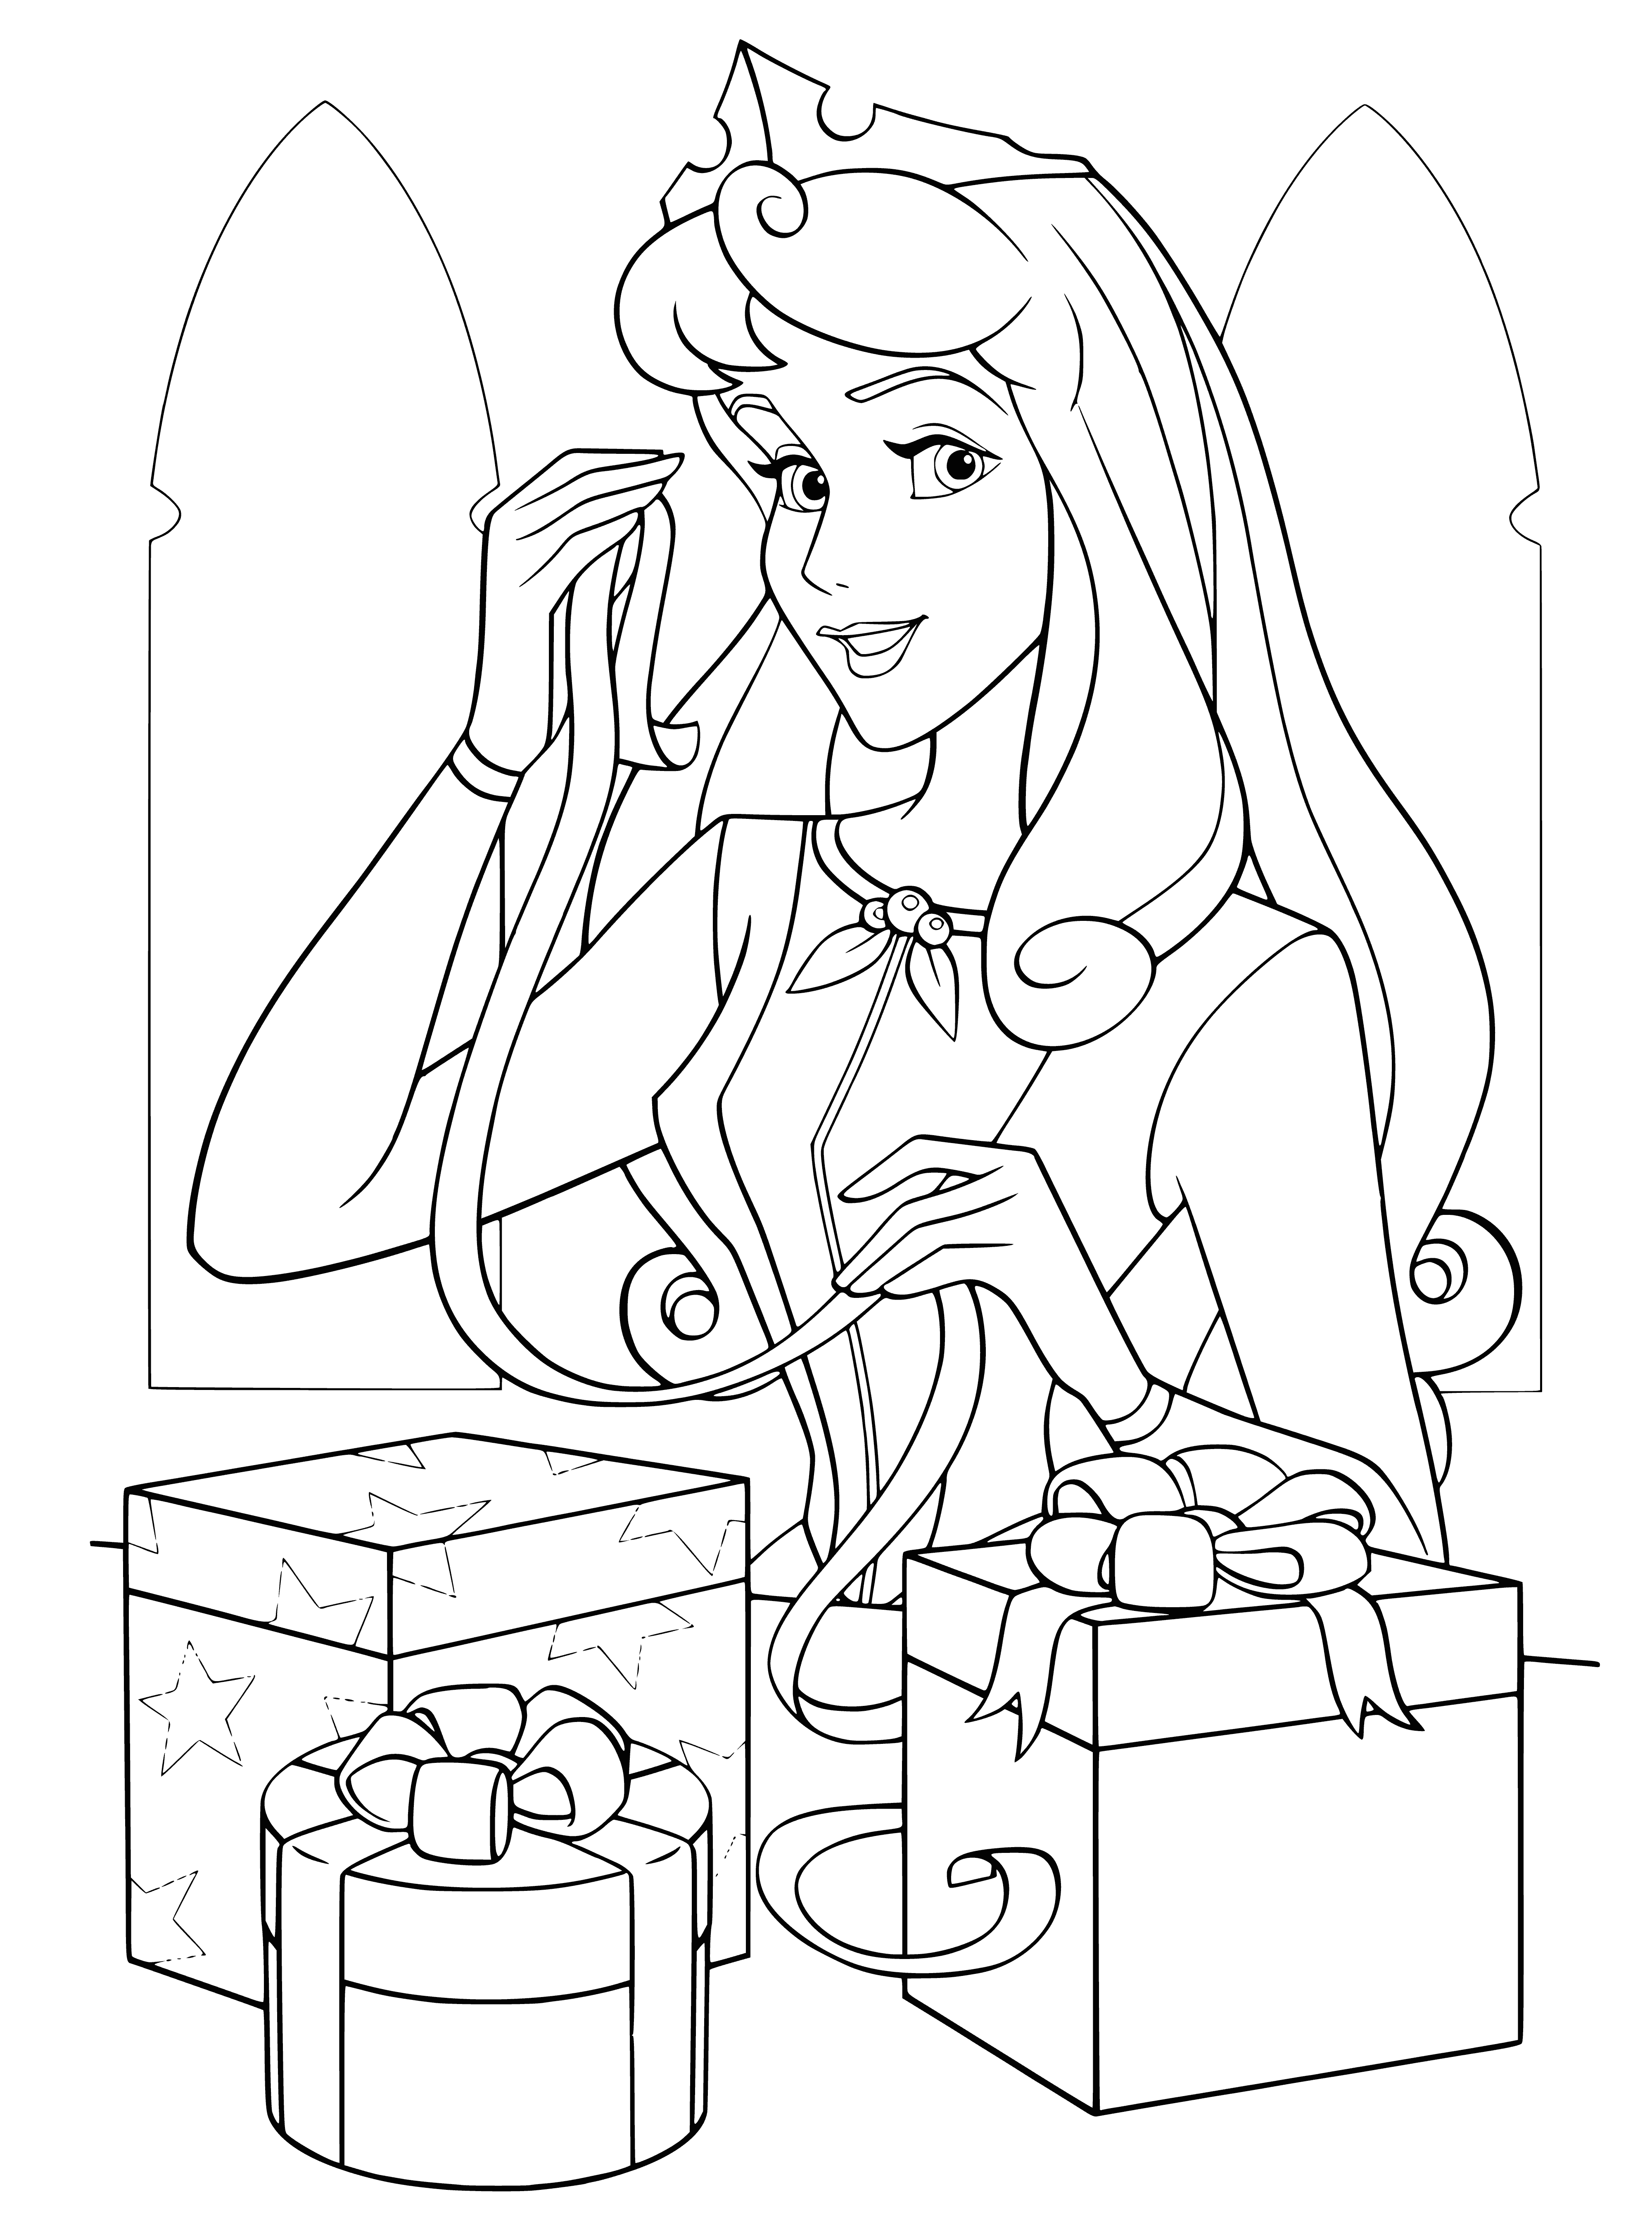 coloring page: Disney princesses celebrate New Year's, each with a unique gift. Aurora has a gift for all: a glass slipper, poisoned apple, dinglehopper, rose, lamp, drum, sword, and lily — they're all ready for a happy, exciting 2021!